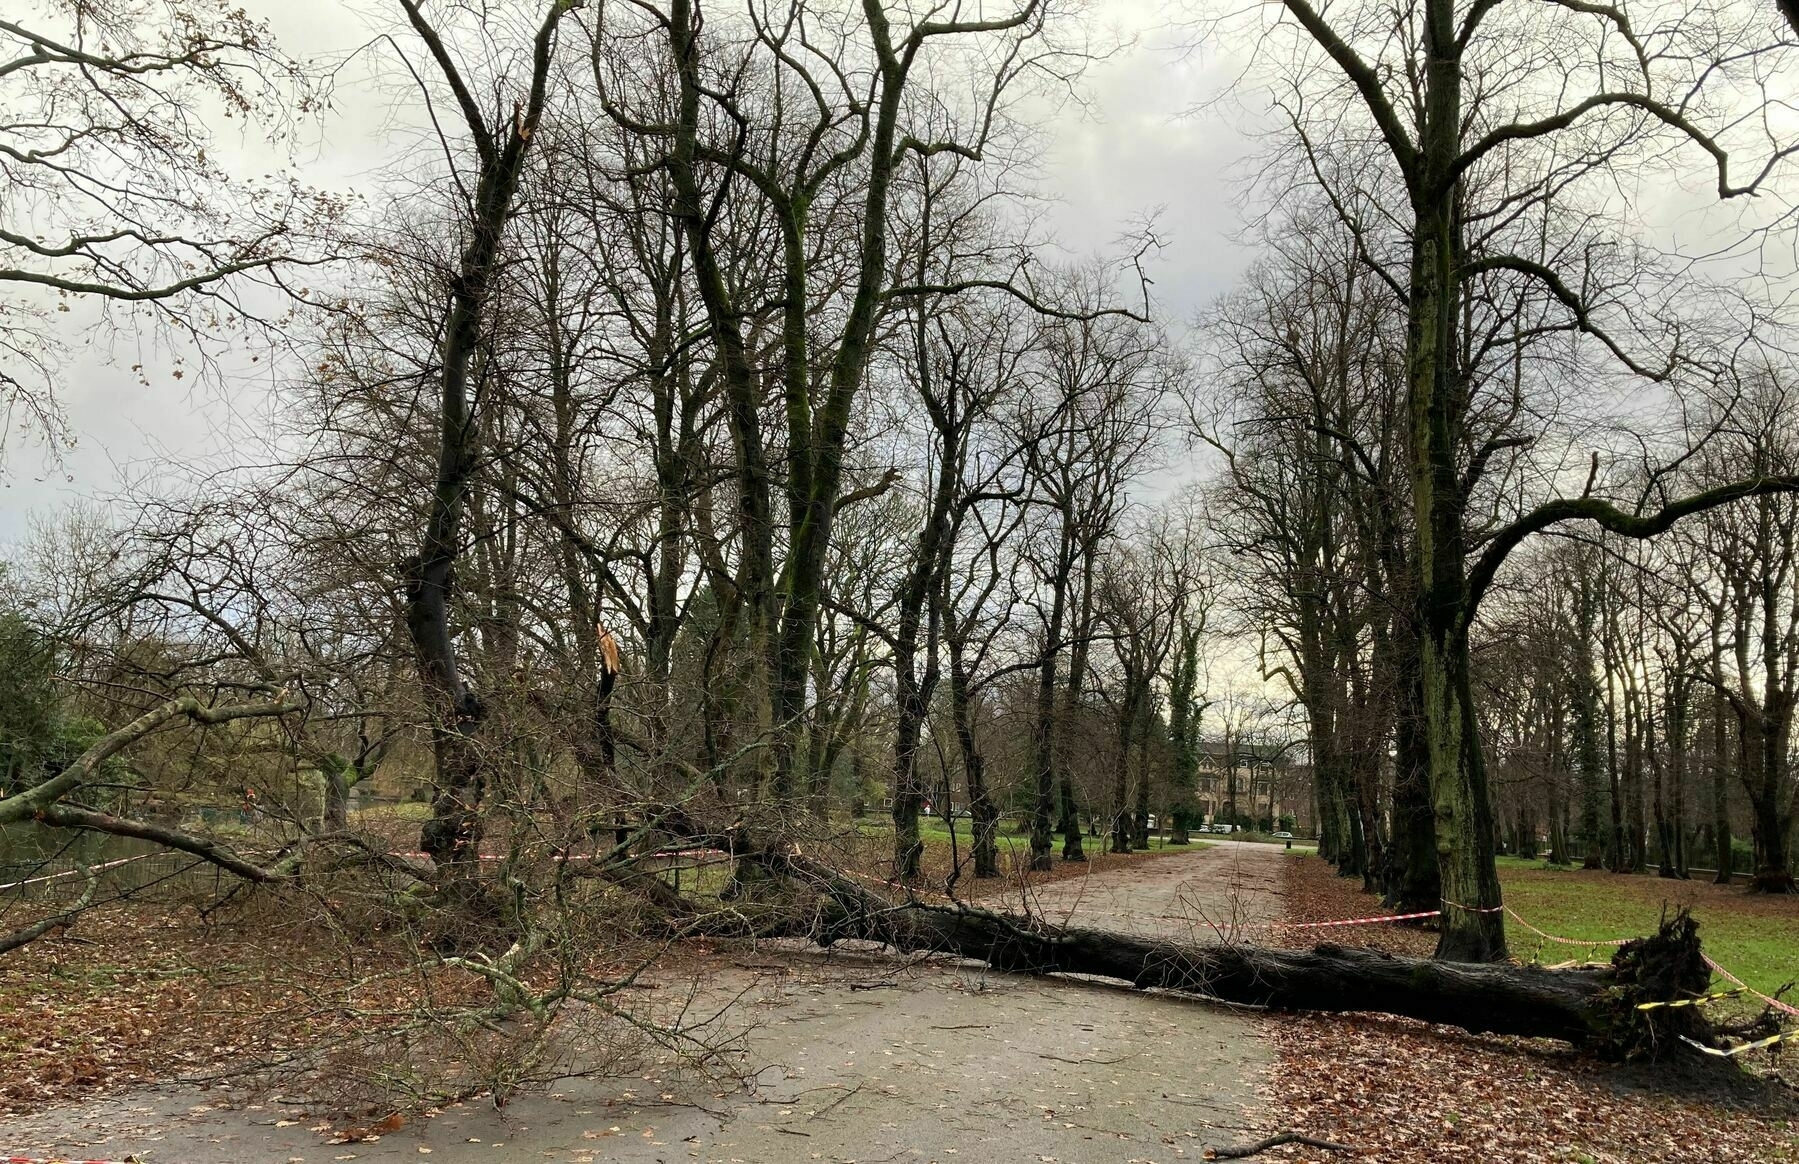 An avenue of trees line a wide path with one tree fallen across the path.